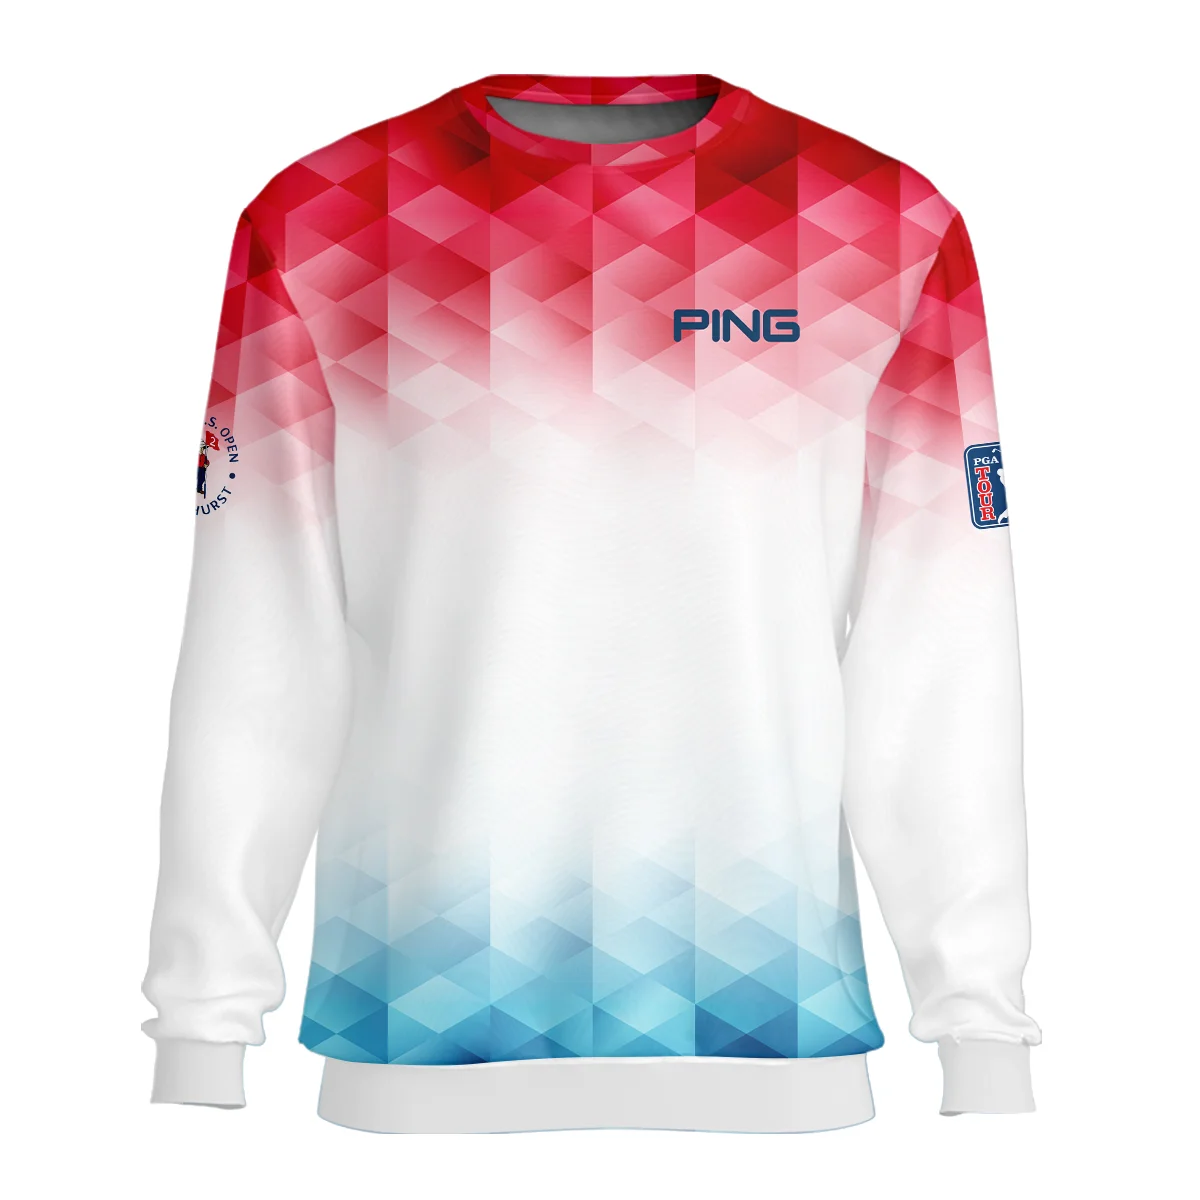 124th U.S. Open Pinehurst Ping Golf Sport Bomber Jacket Blue Red Abstract Geometric Triangles All Over Print Bomber Jacket